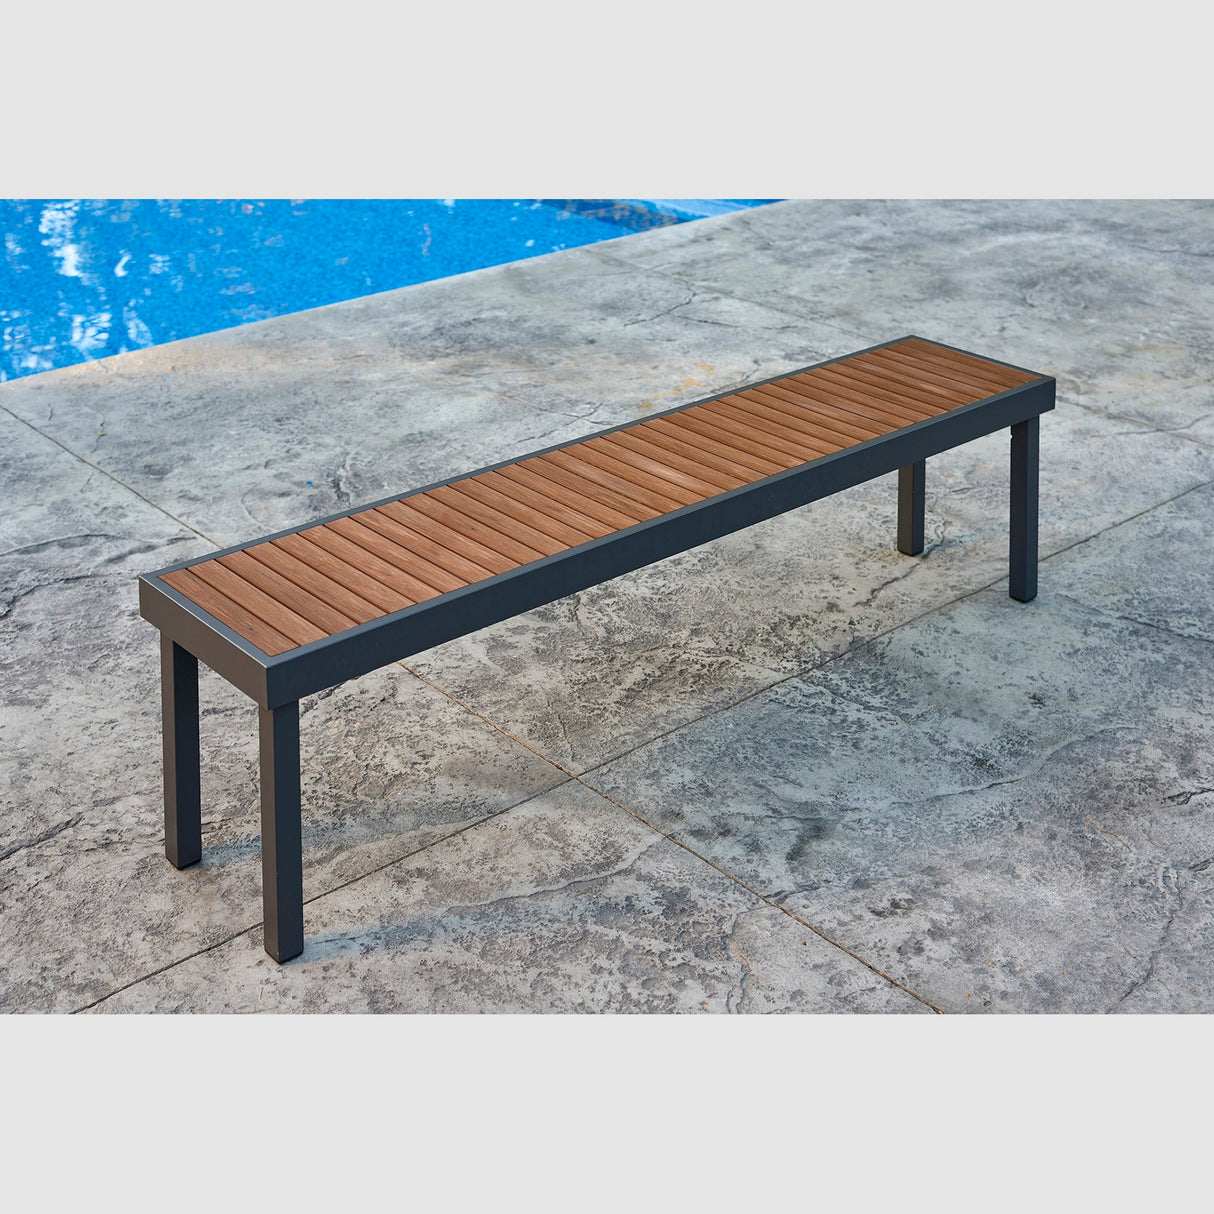 The Kenwood Long Bench poolside next to the water